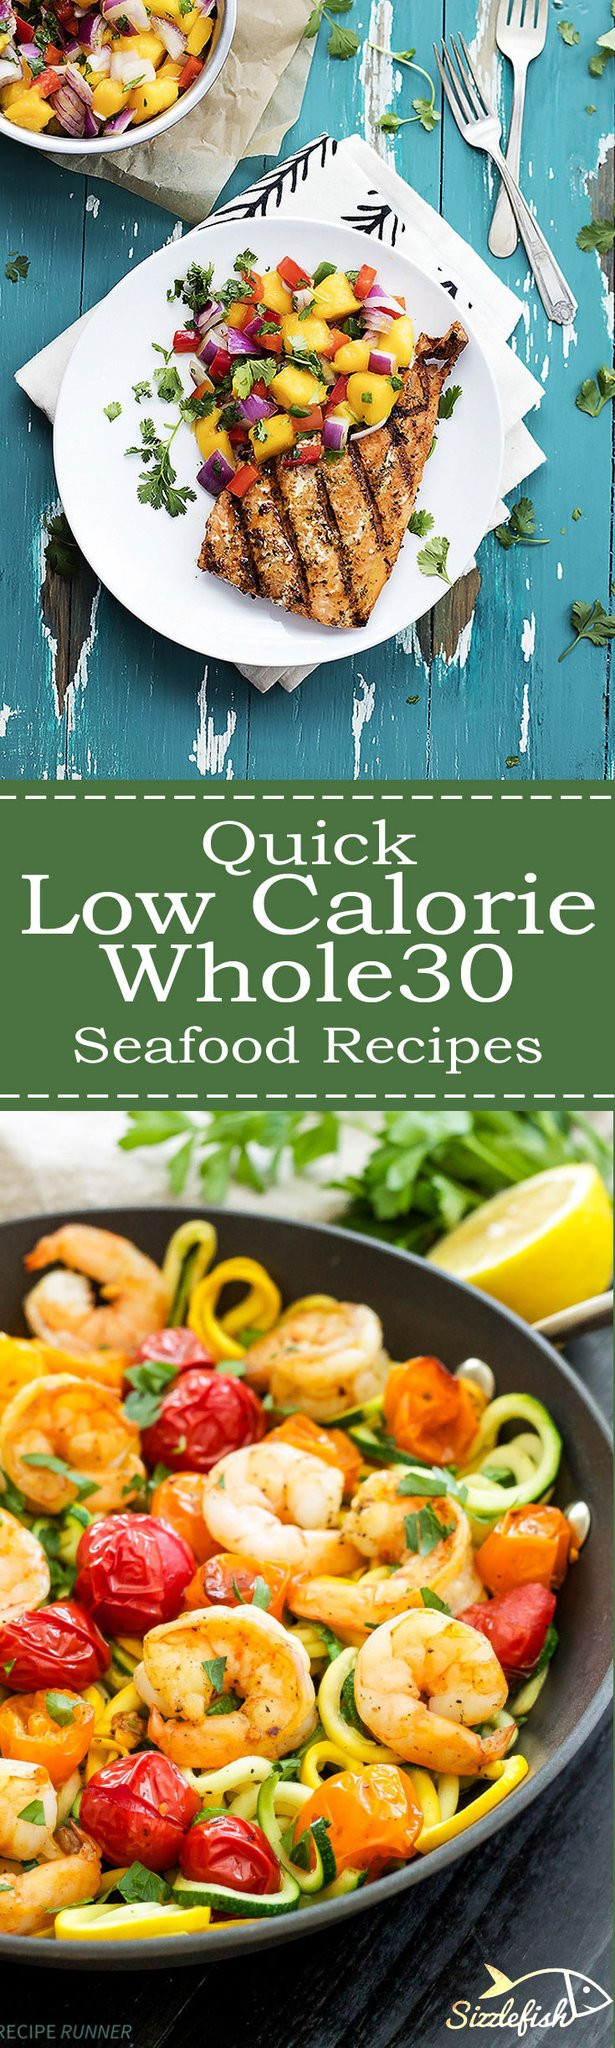 Low Calorie Seafood Recipes
 Quick Low Calorie Whole30 Seafood Recipes – Sizzlefish